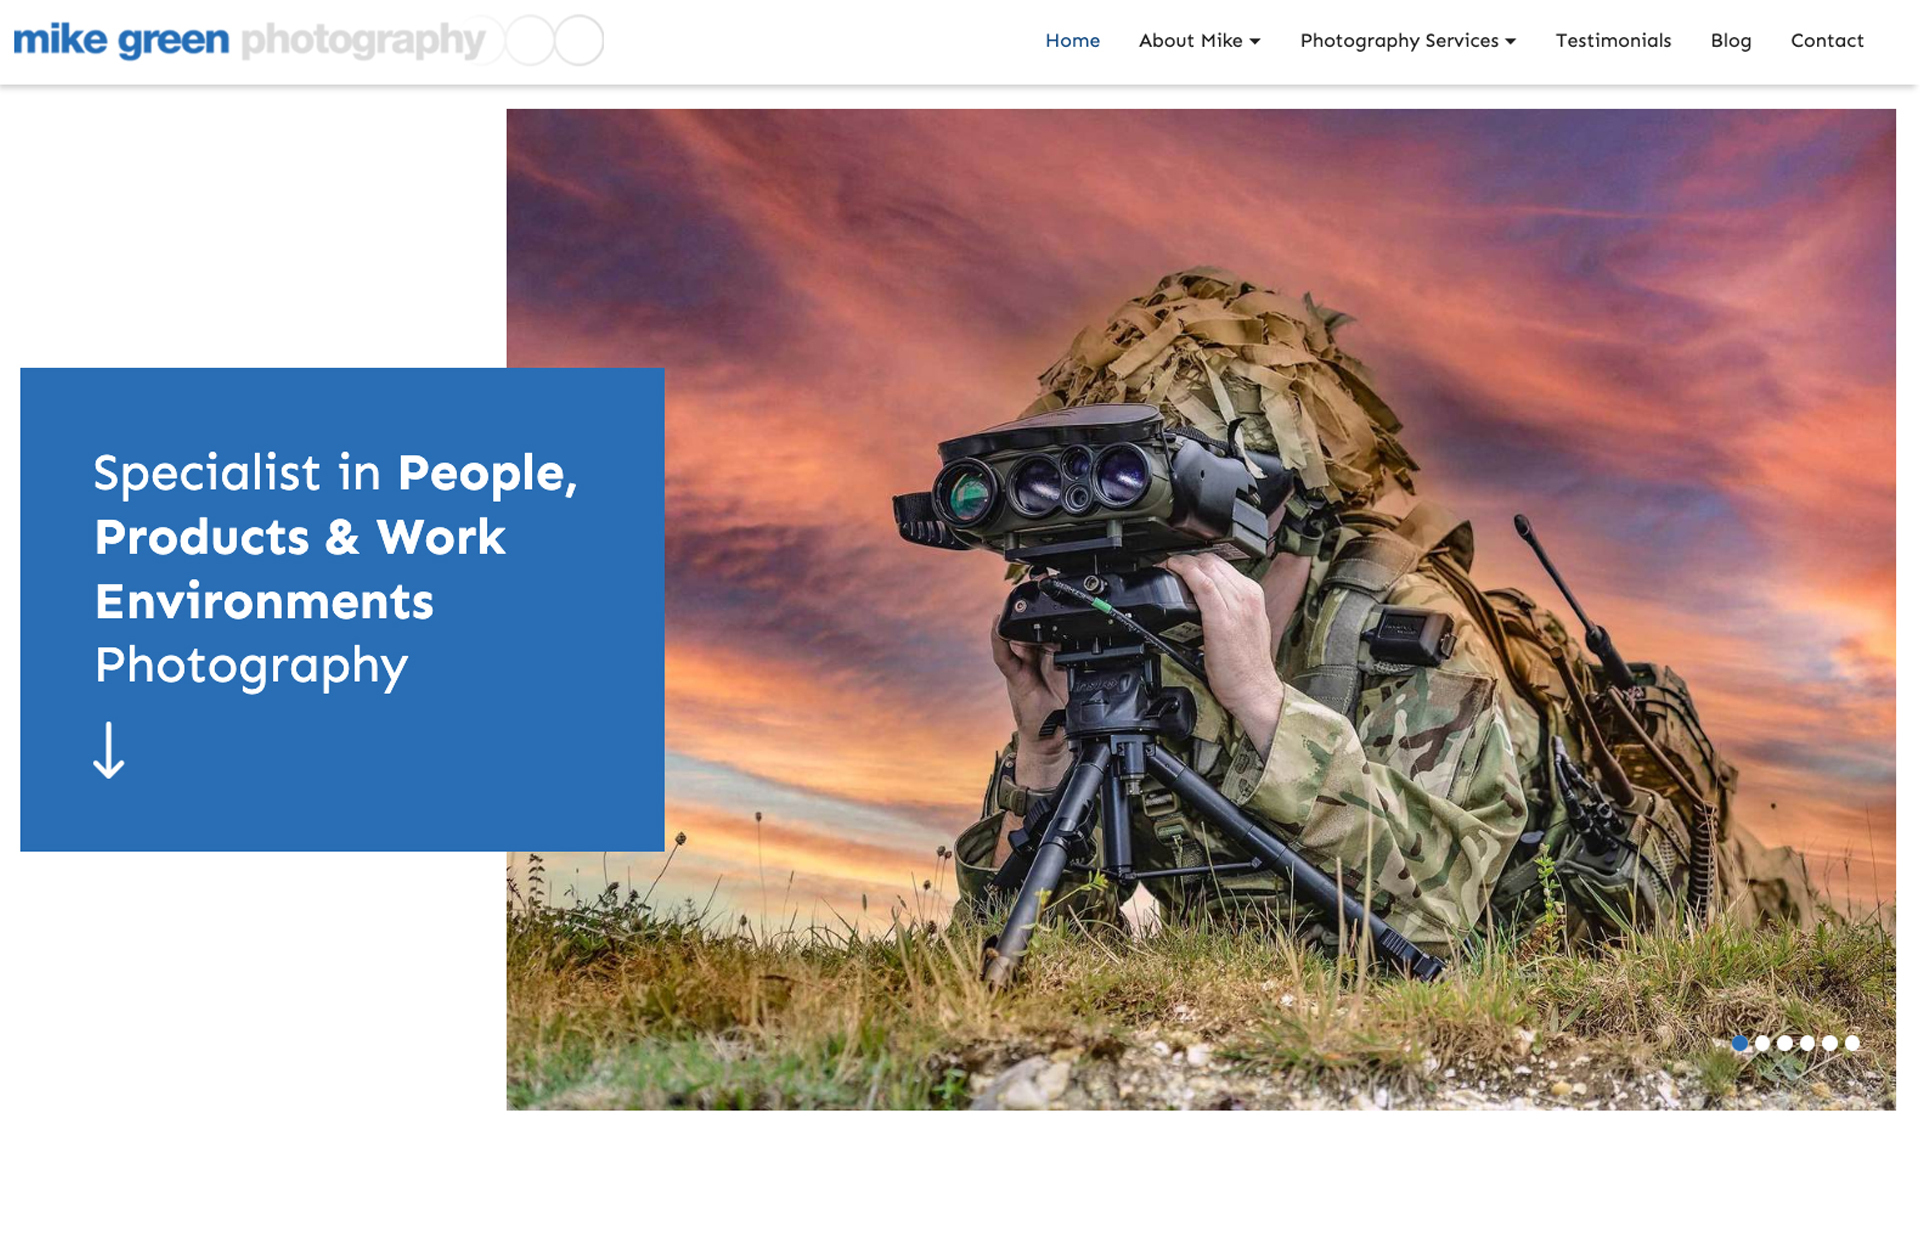 Mike Green Photography website design